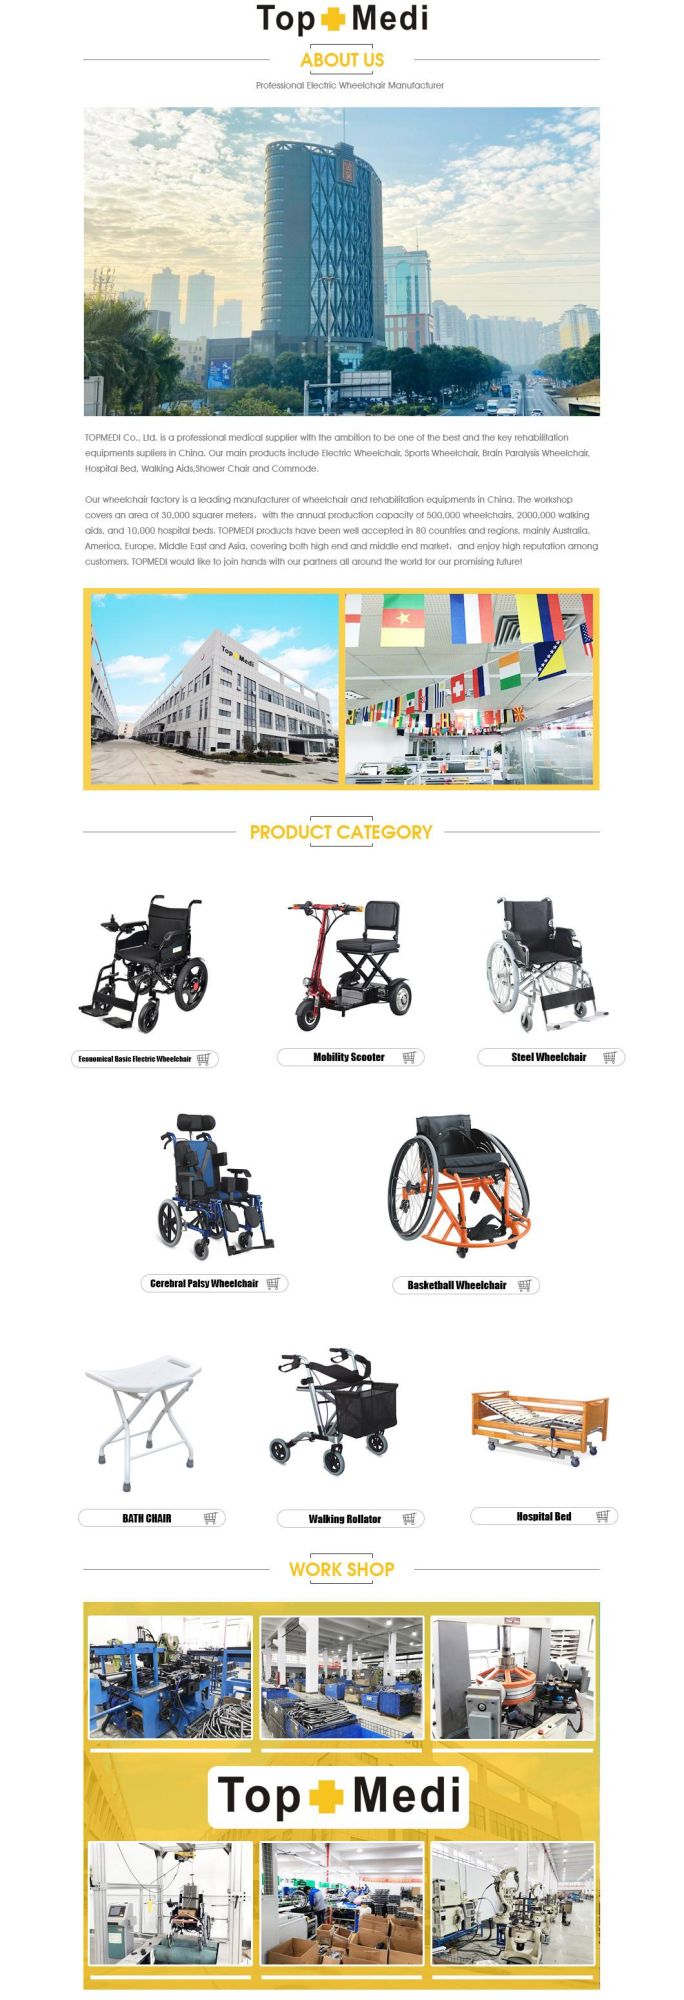 100kg Loading Capacity Folding Walker Rollator with Seat for The Elderly